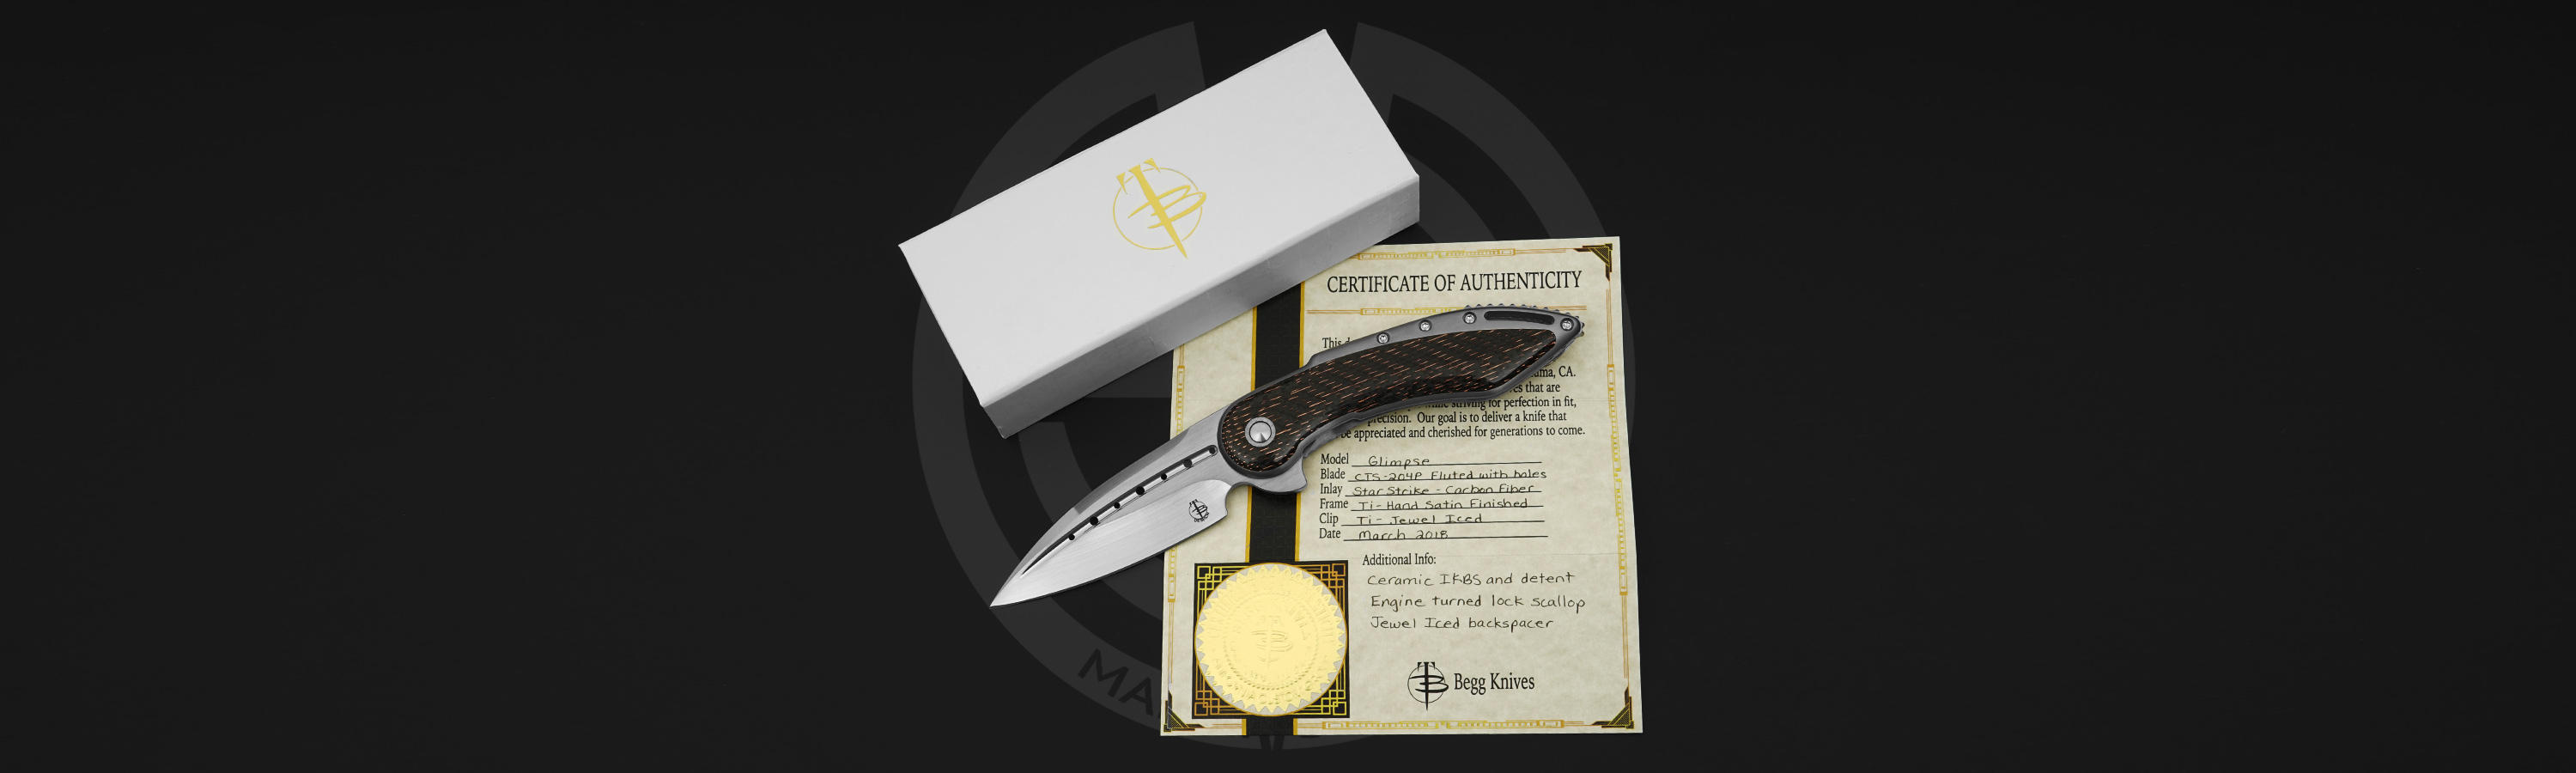 Begg Knives Certificate of Authenticity